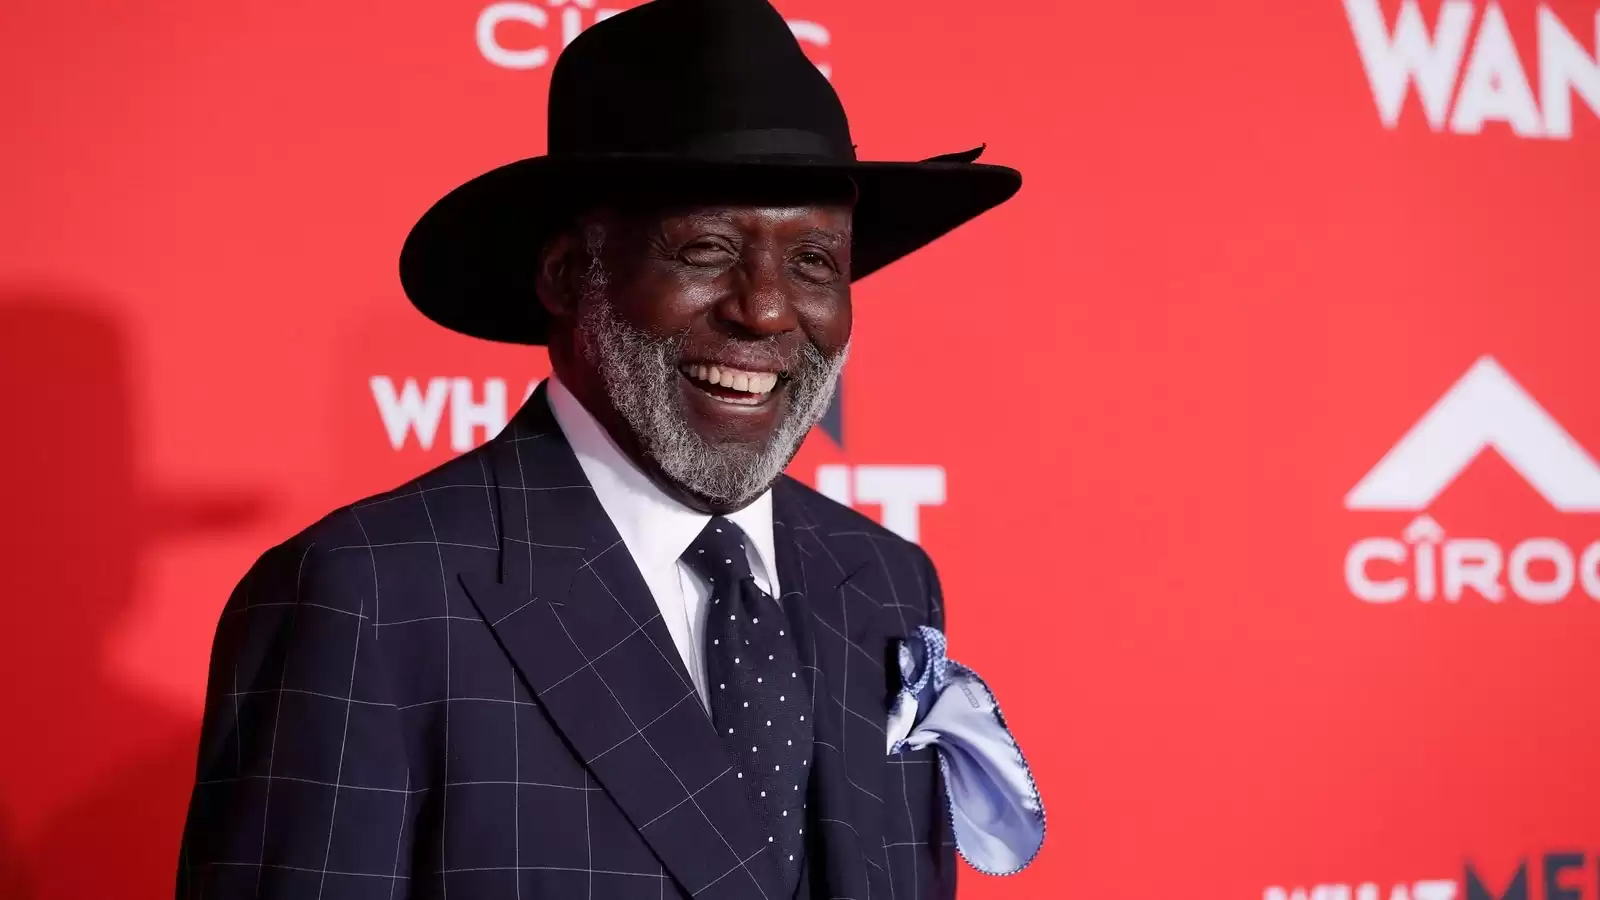 Action Hero Richard Roundtree, Star of Shaft, Dies at 81 from Pancreatic Cancer